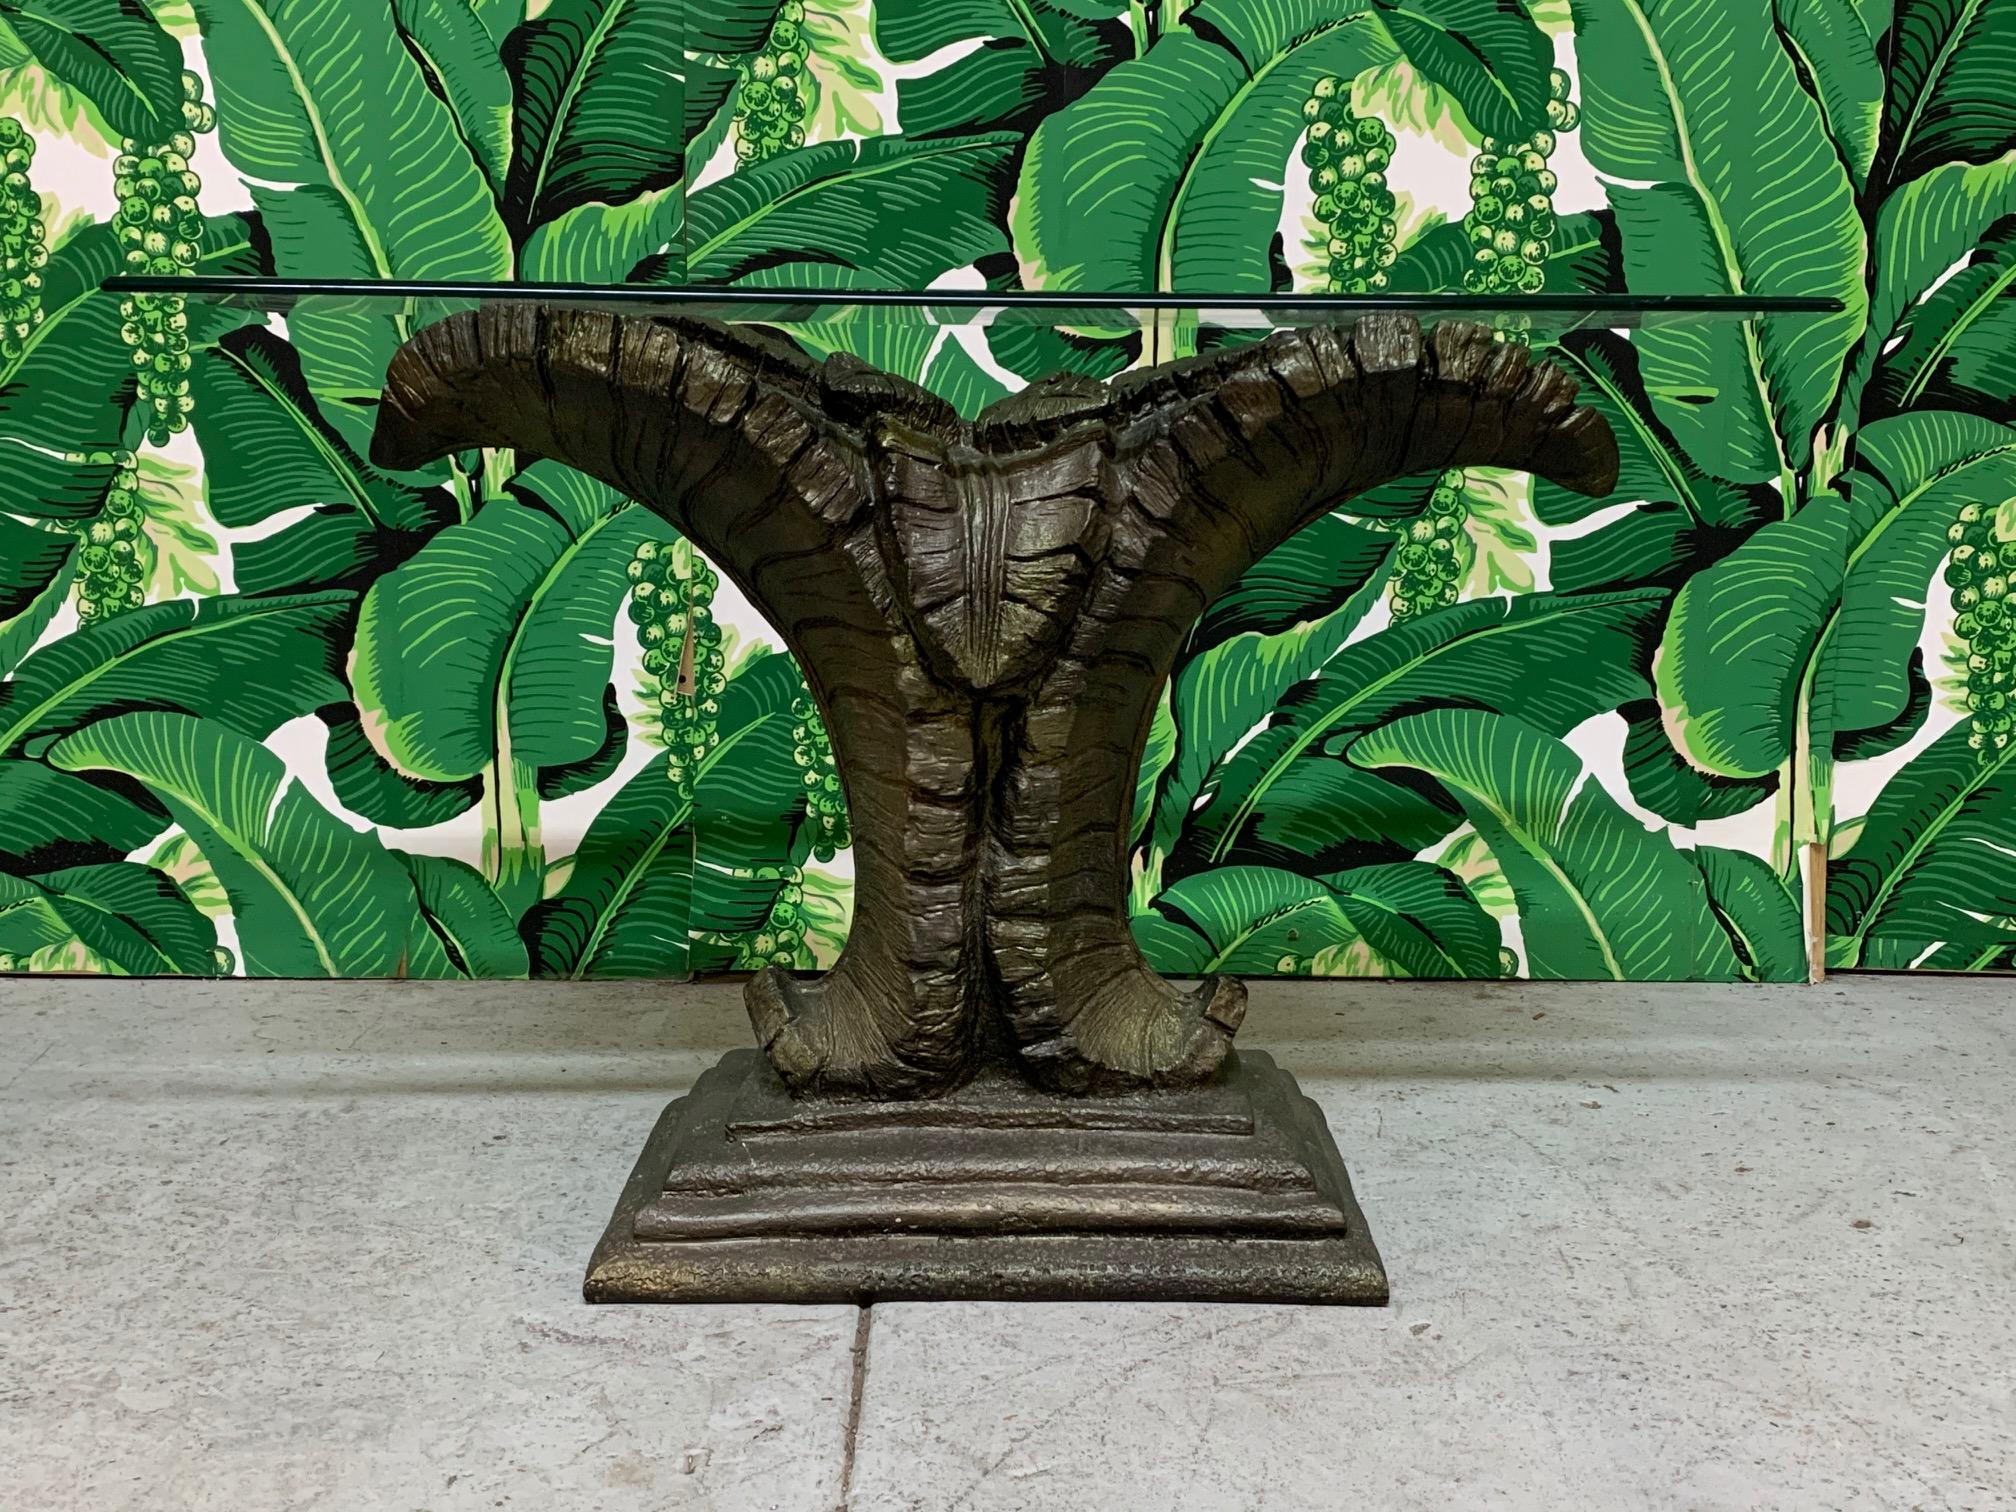 Console table sculpted in form of large palm leaves. Based in the style of Serge Roche or Dorothy Draper. Console features dramatic tropical tree designed pedestal with a glass top. Very good condition with only minor imperfections consistent with